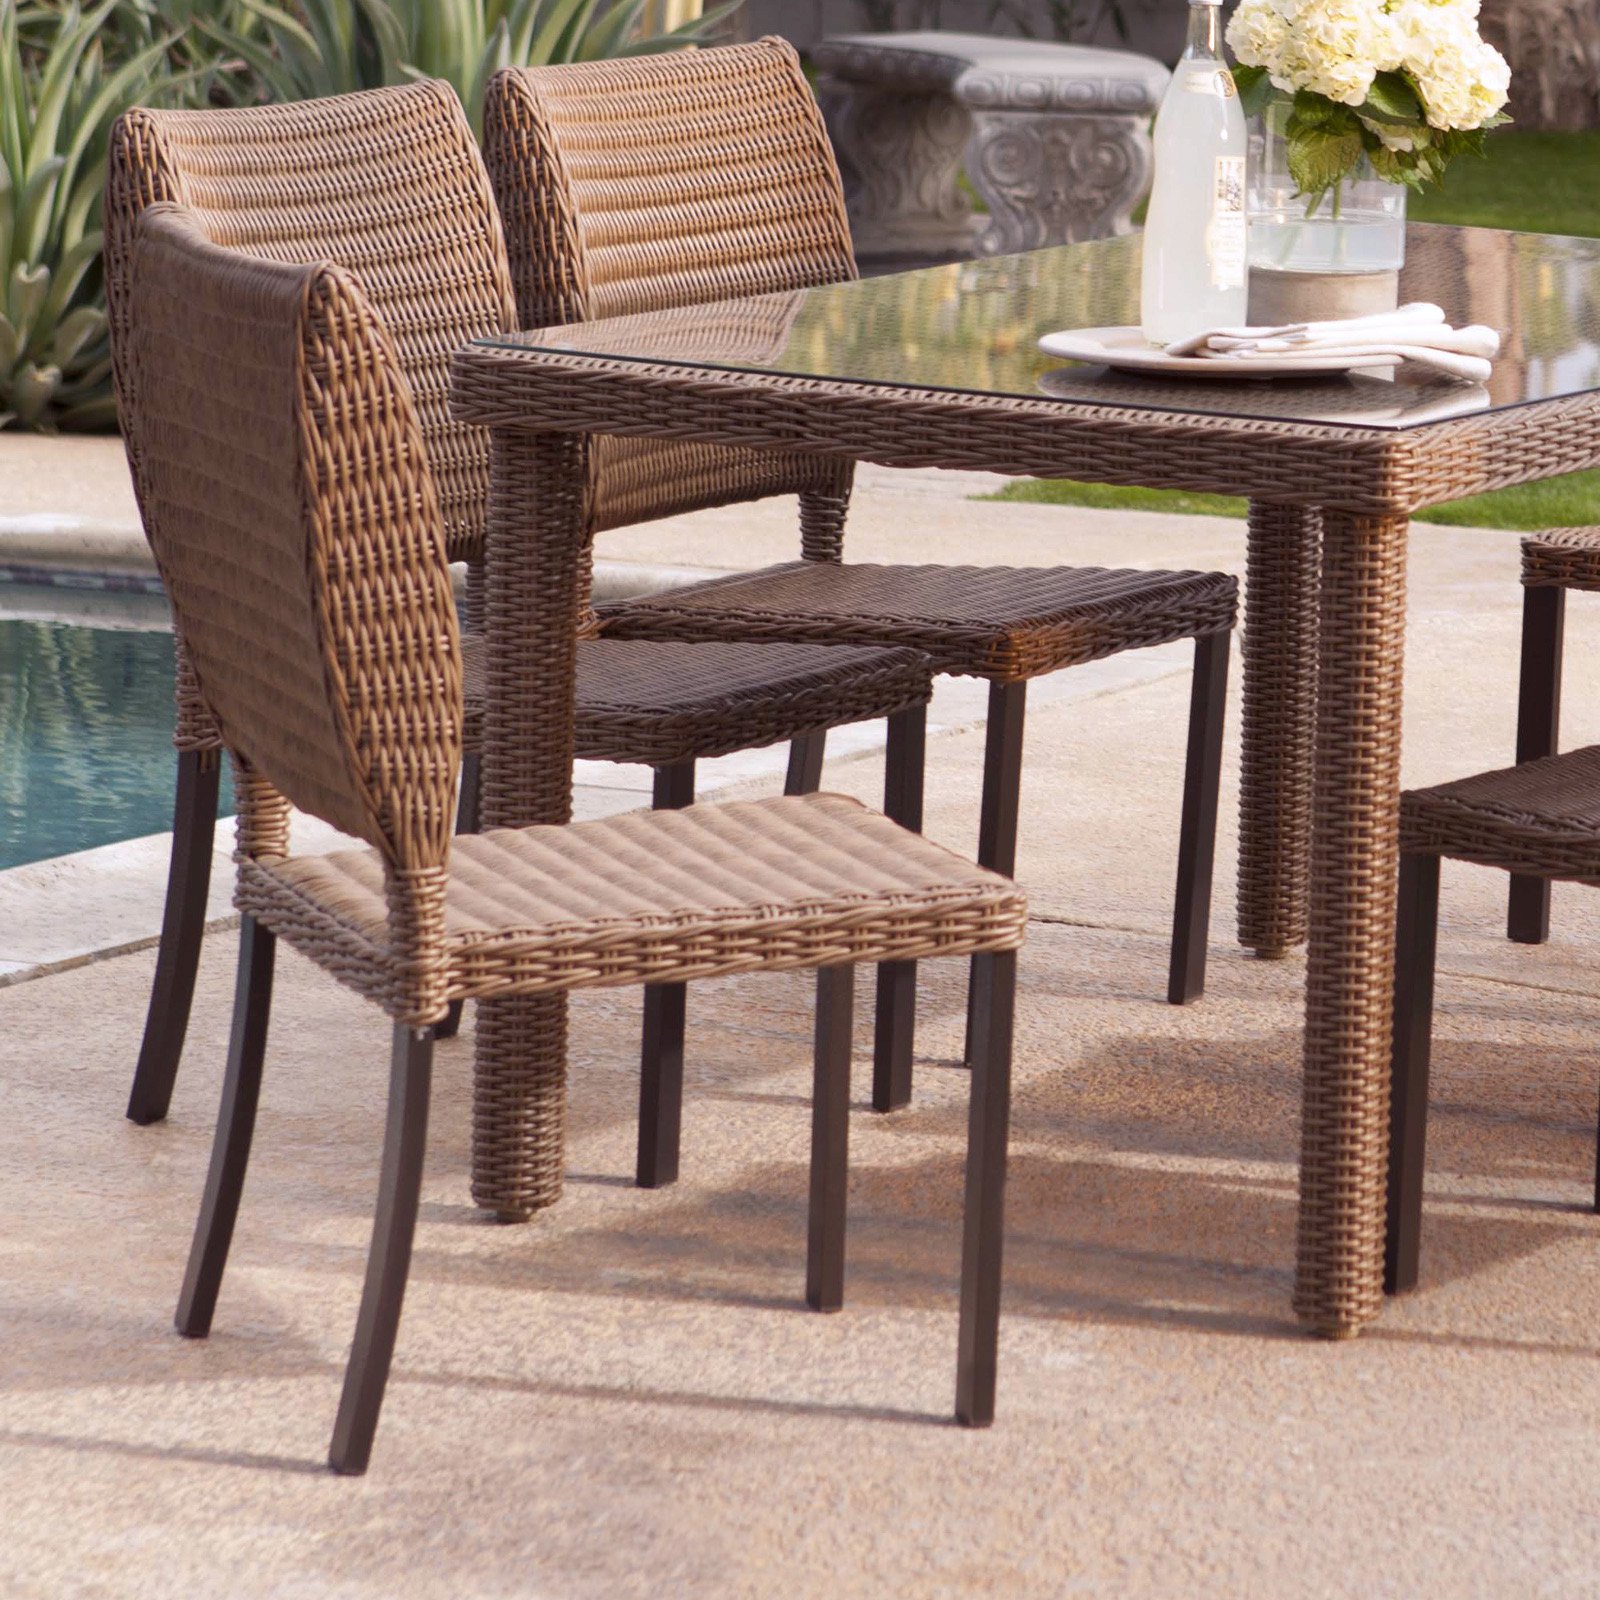 outdoor dining chairs gold coast photo - 2